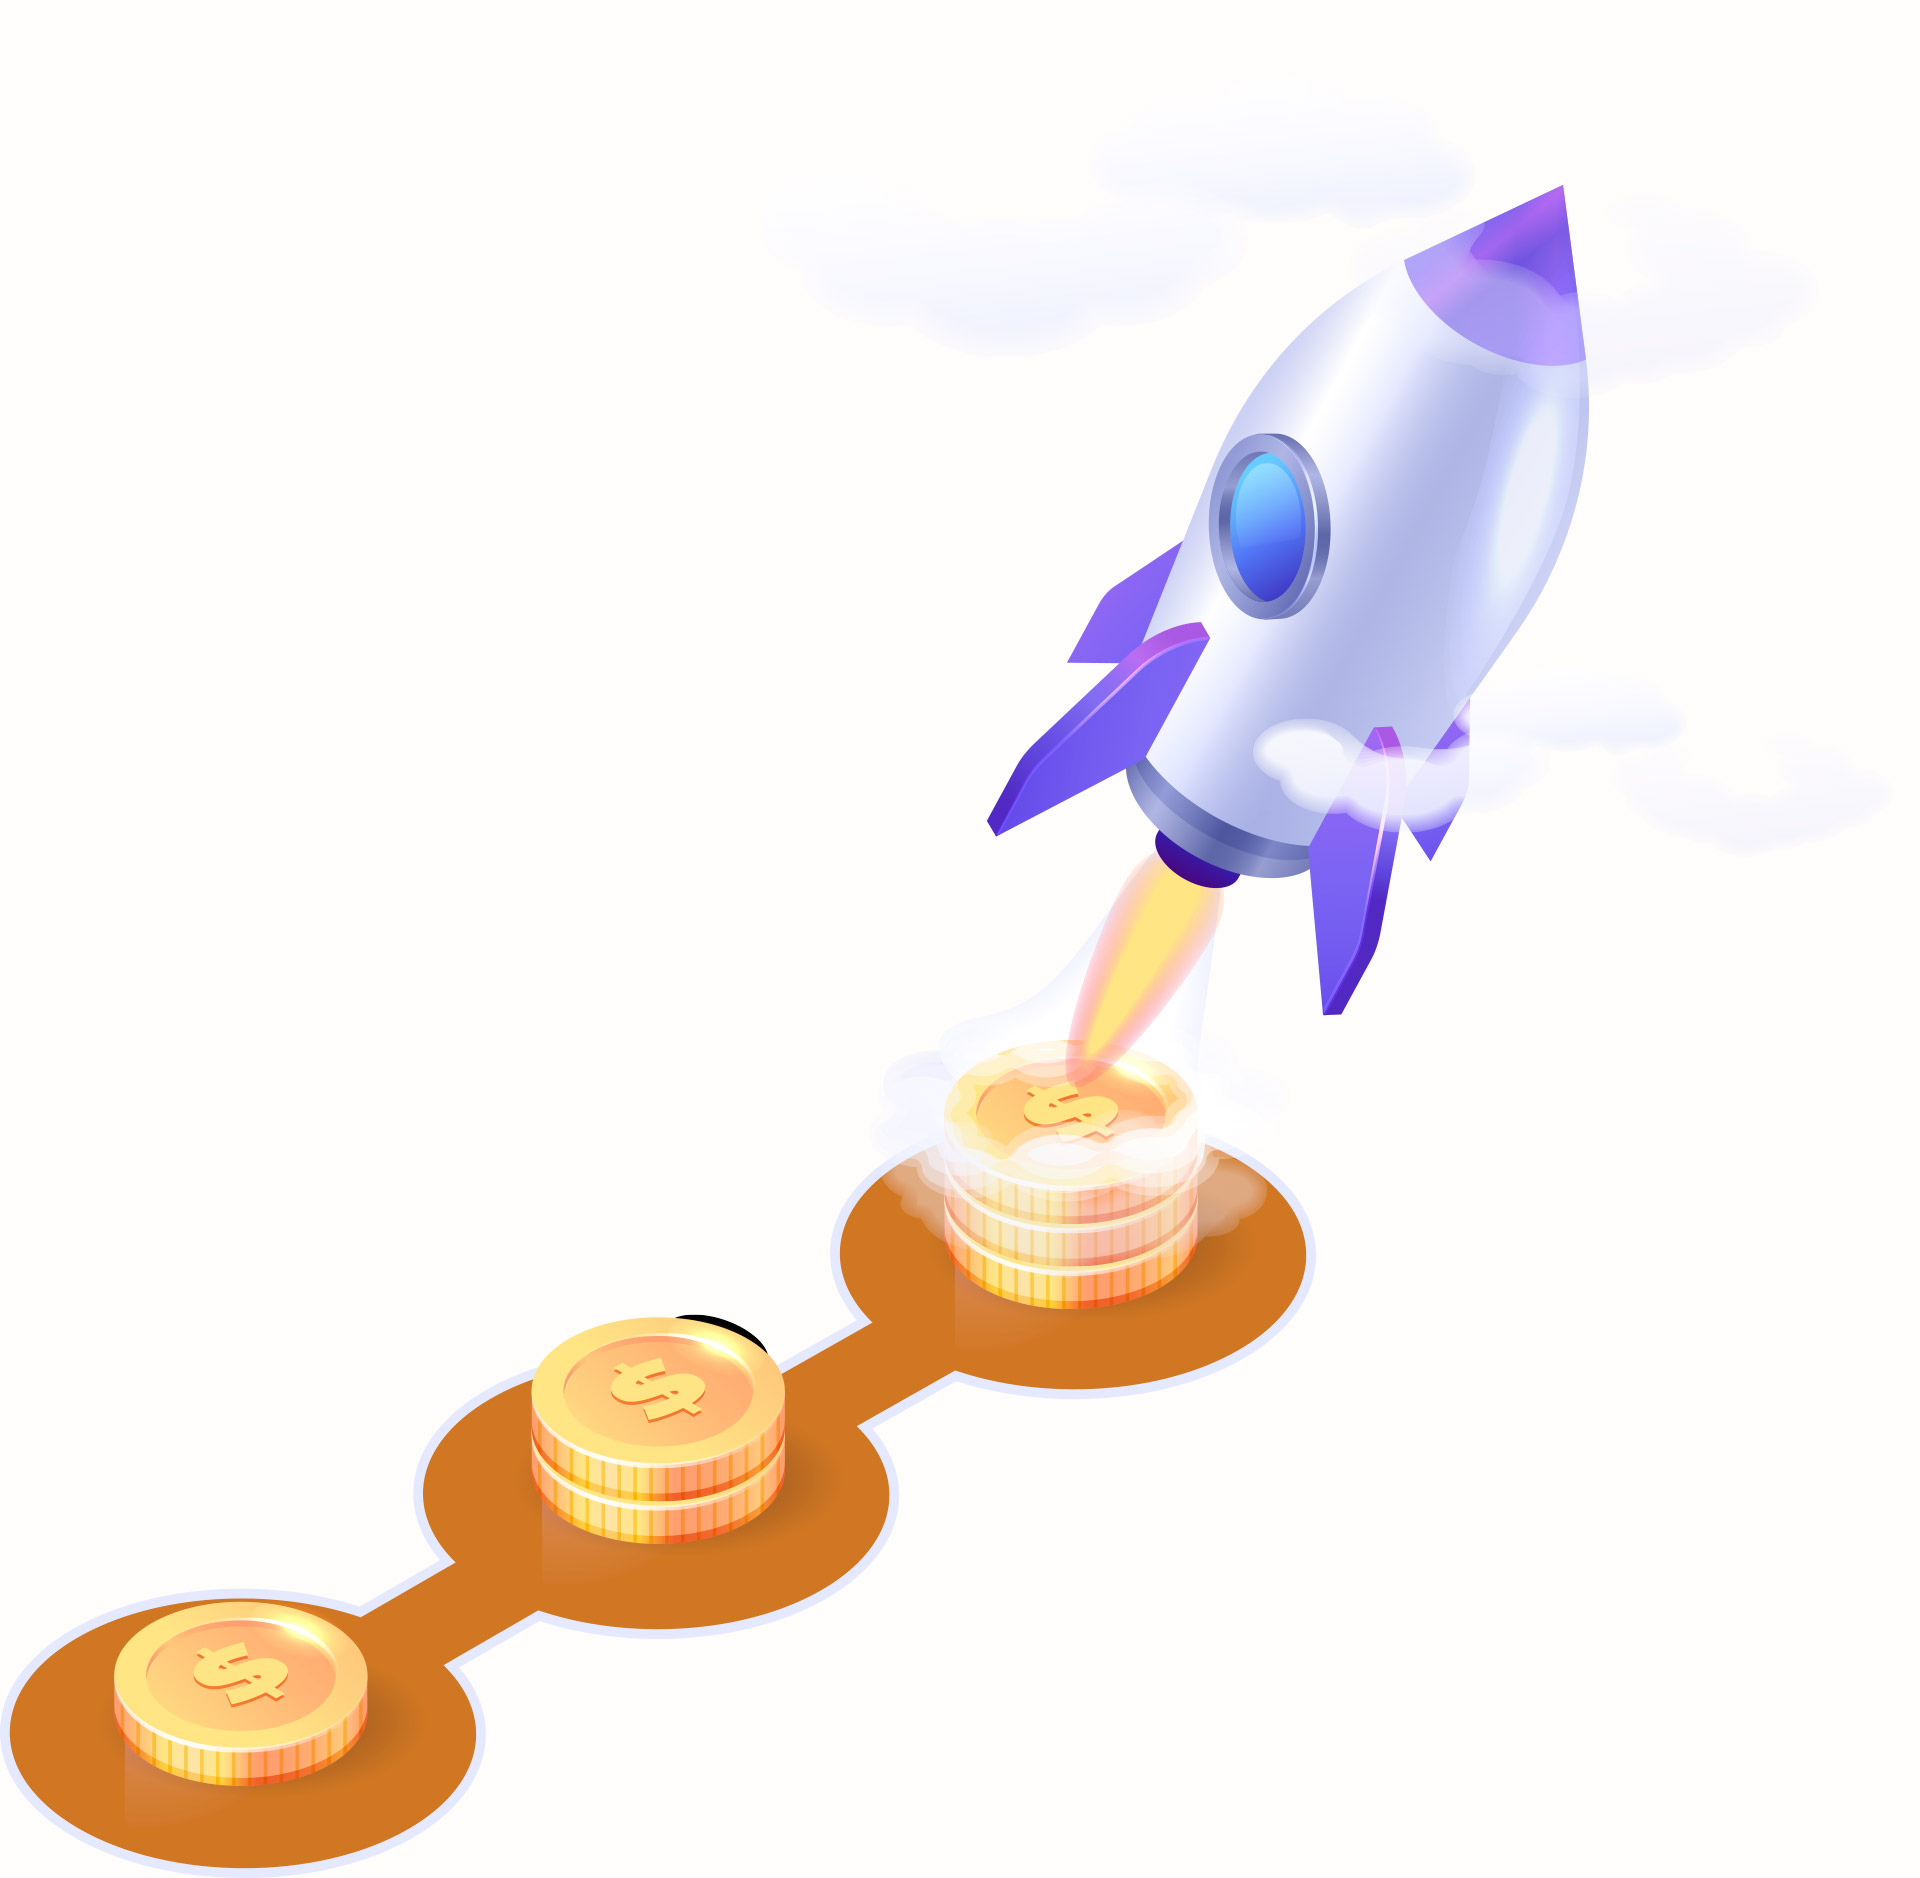 Rocket ship launching from dollar coins